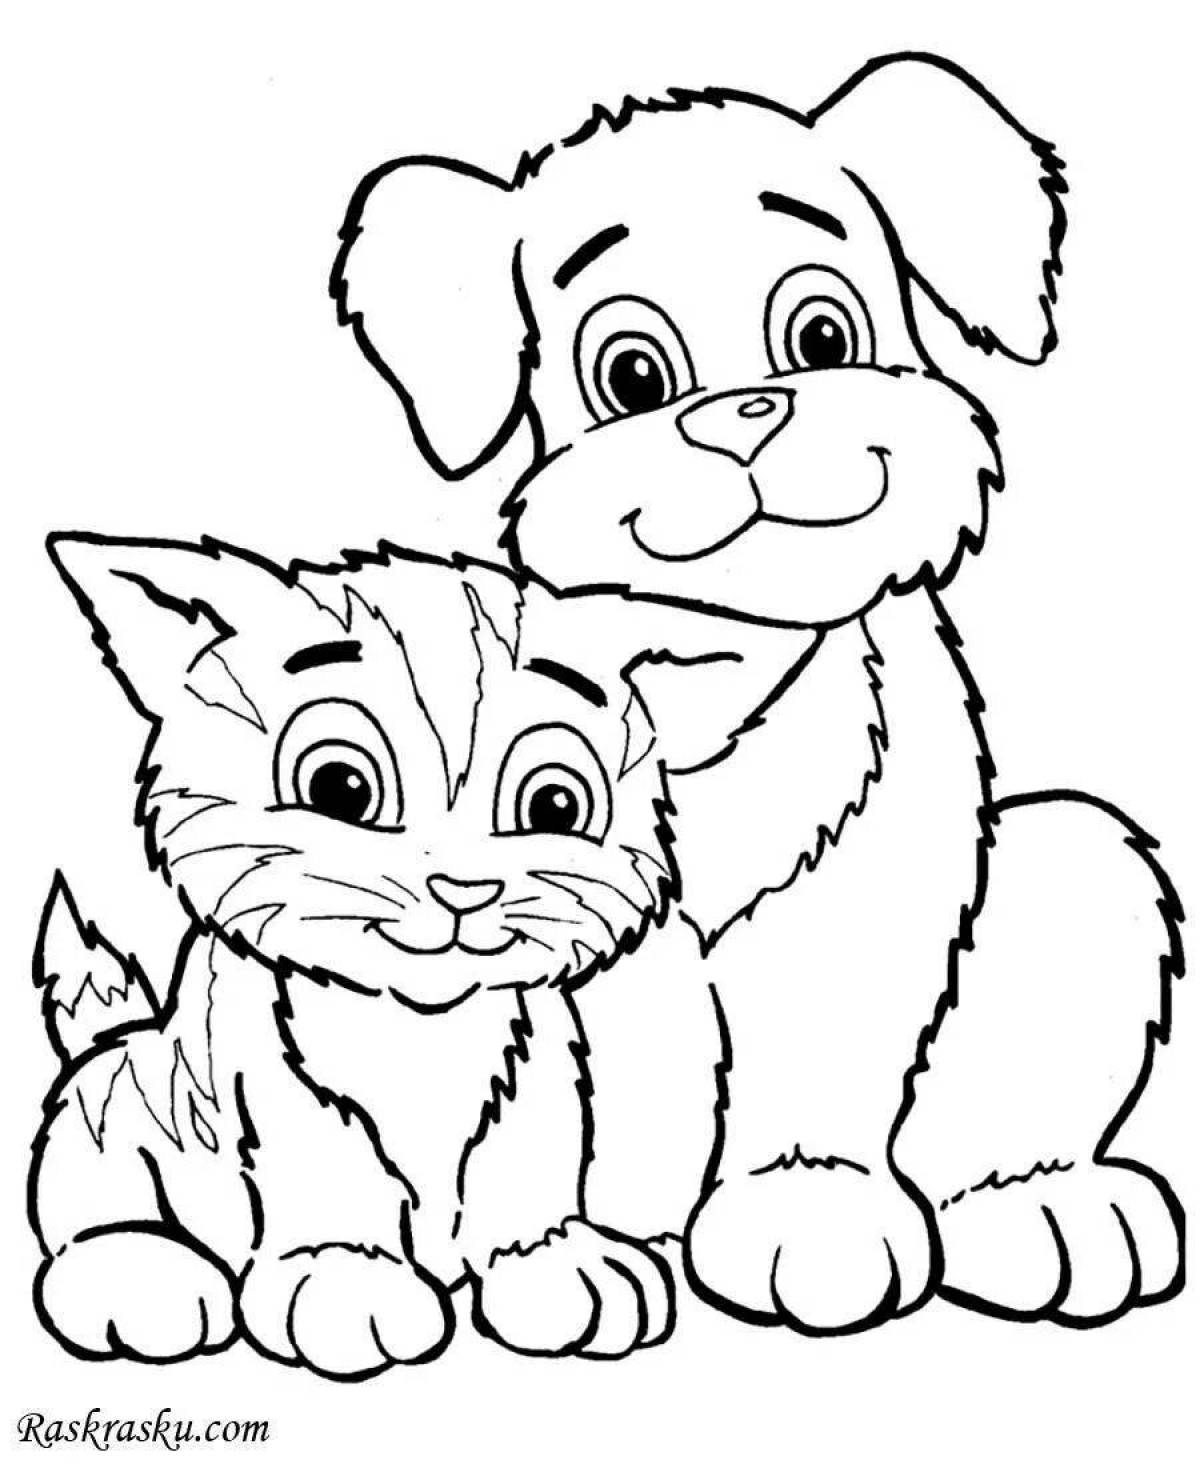 Dan kitty and dogs gorgeous coloring book